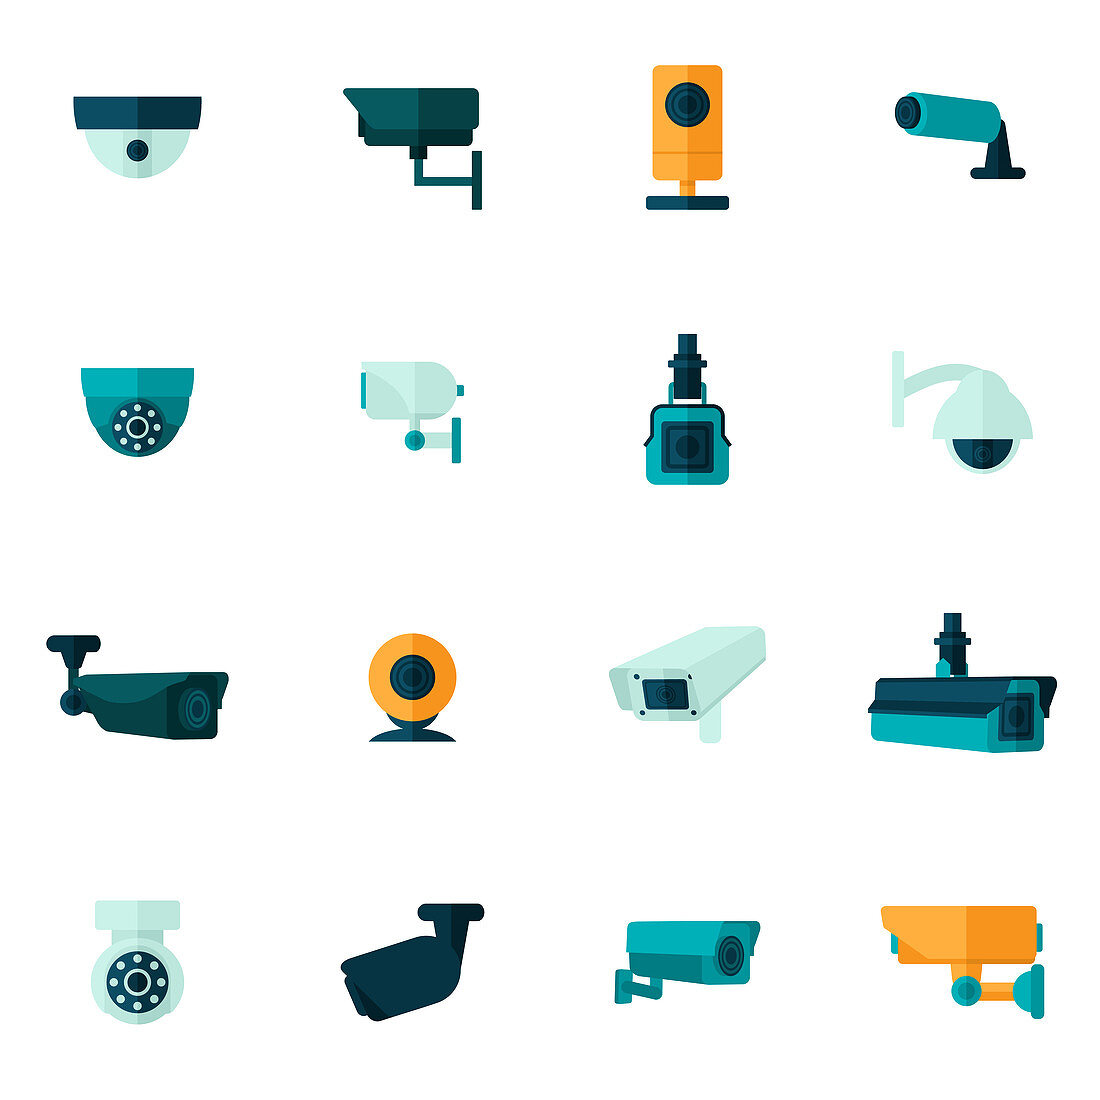 Security camera icons, illustration